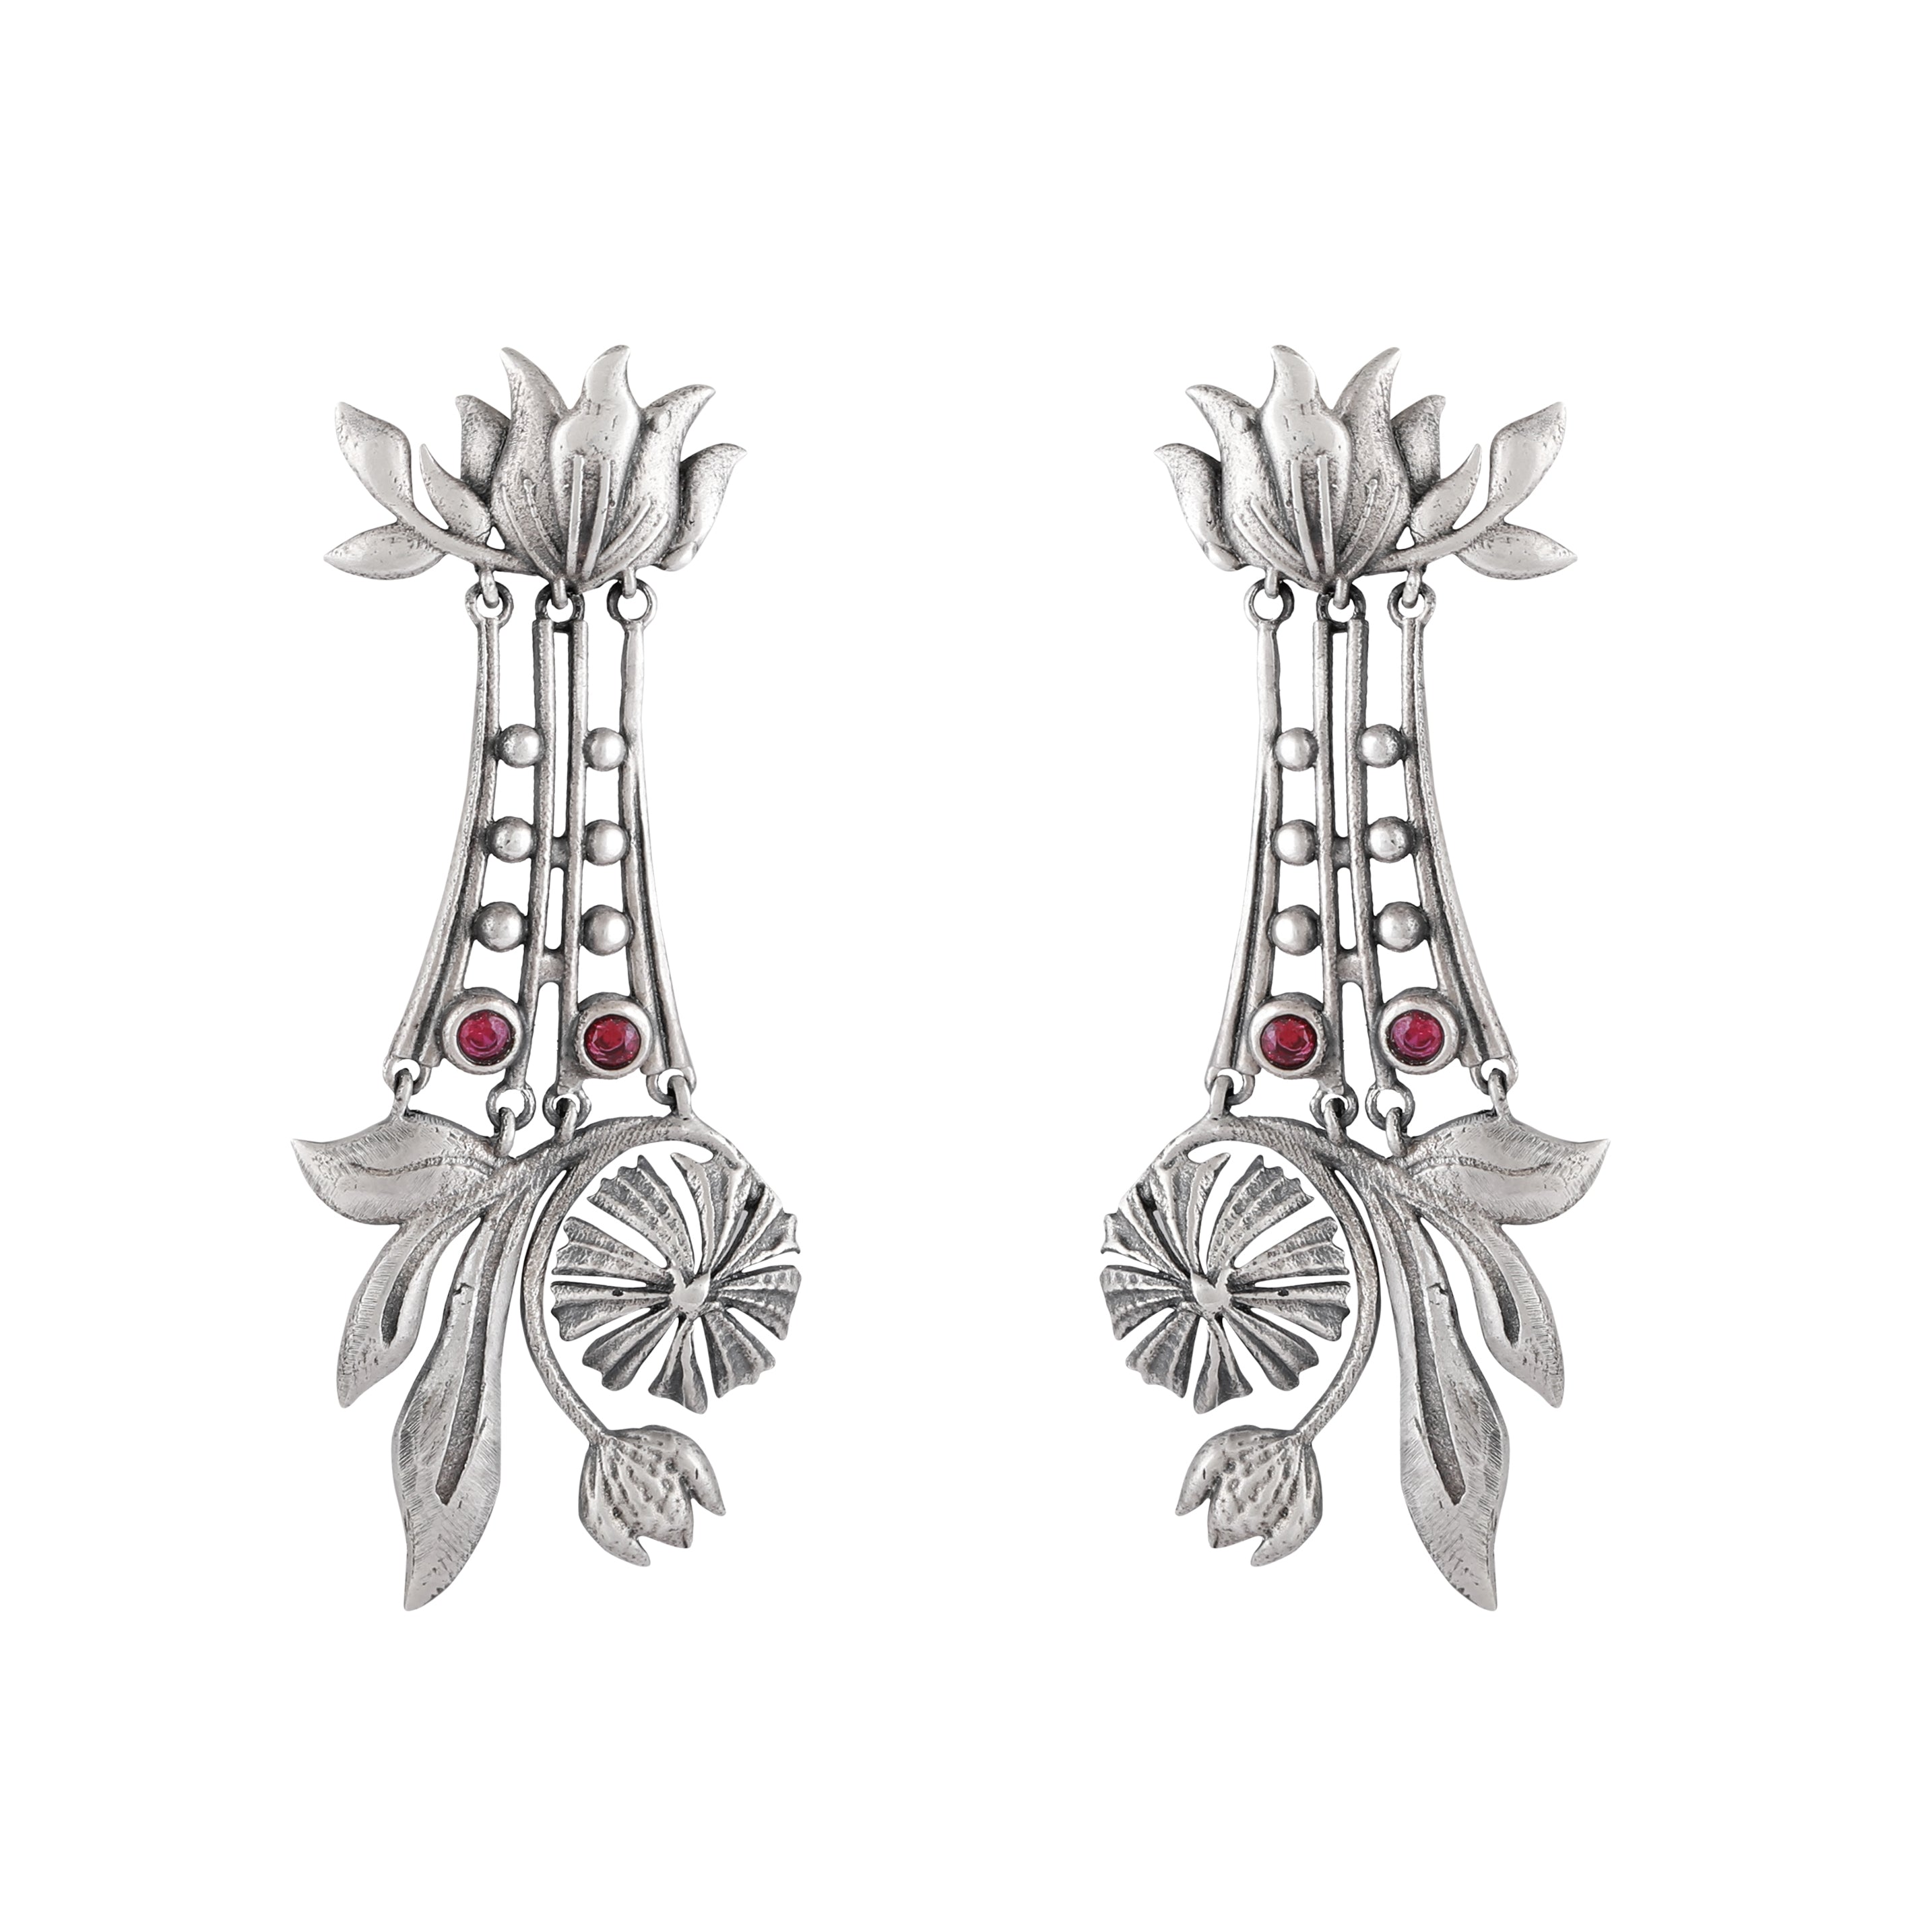 William Morris - Rising Lilly Silver Earrings by Moha